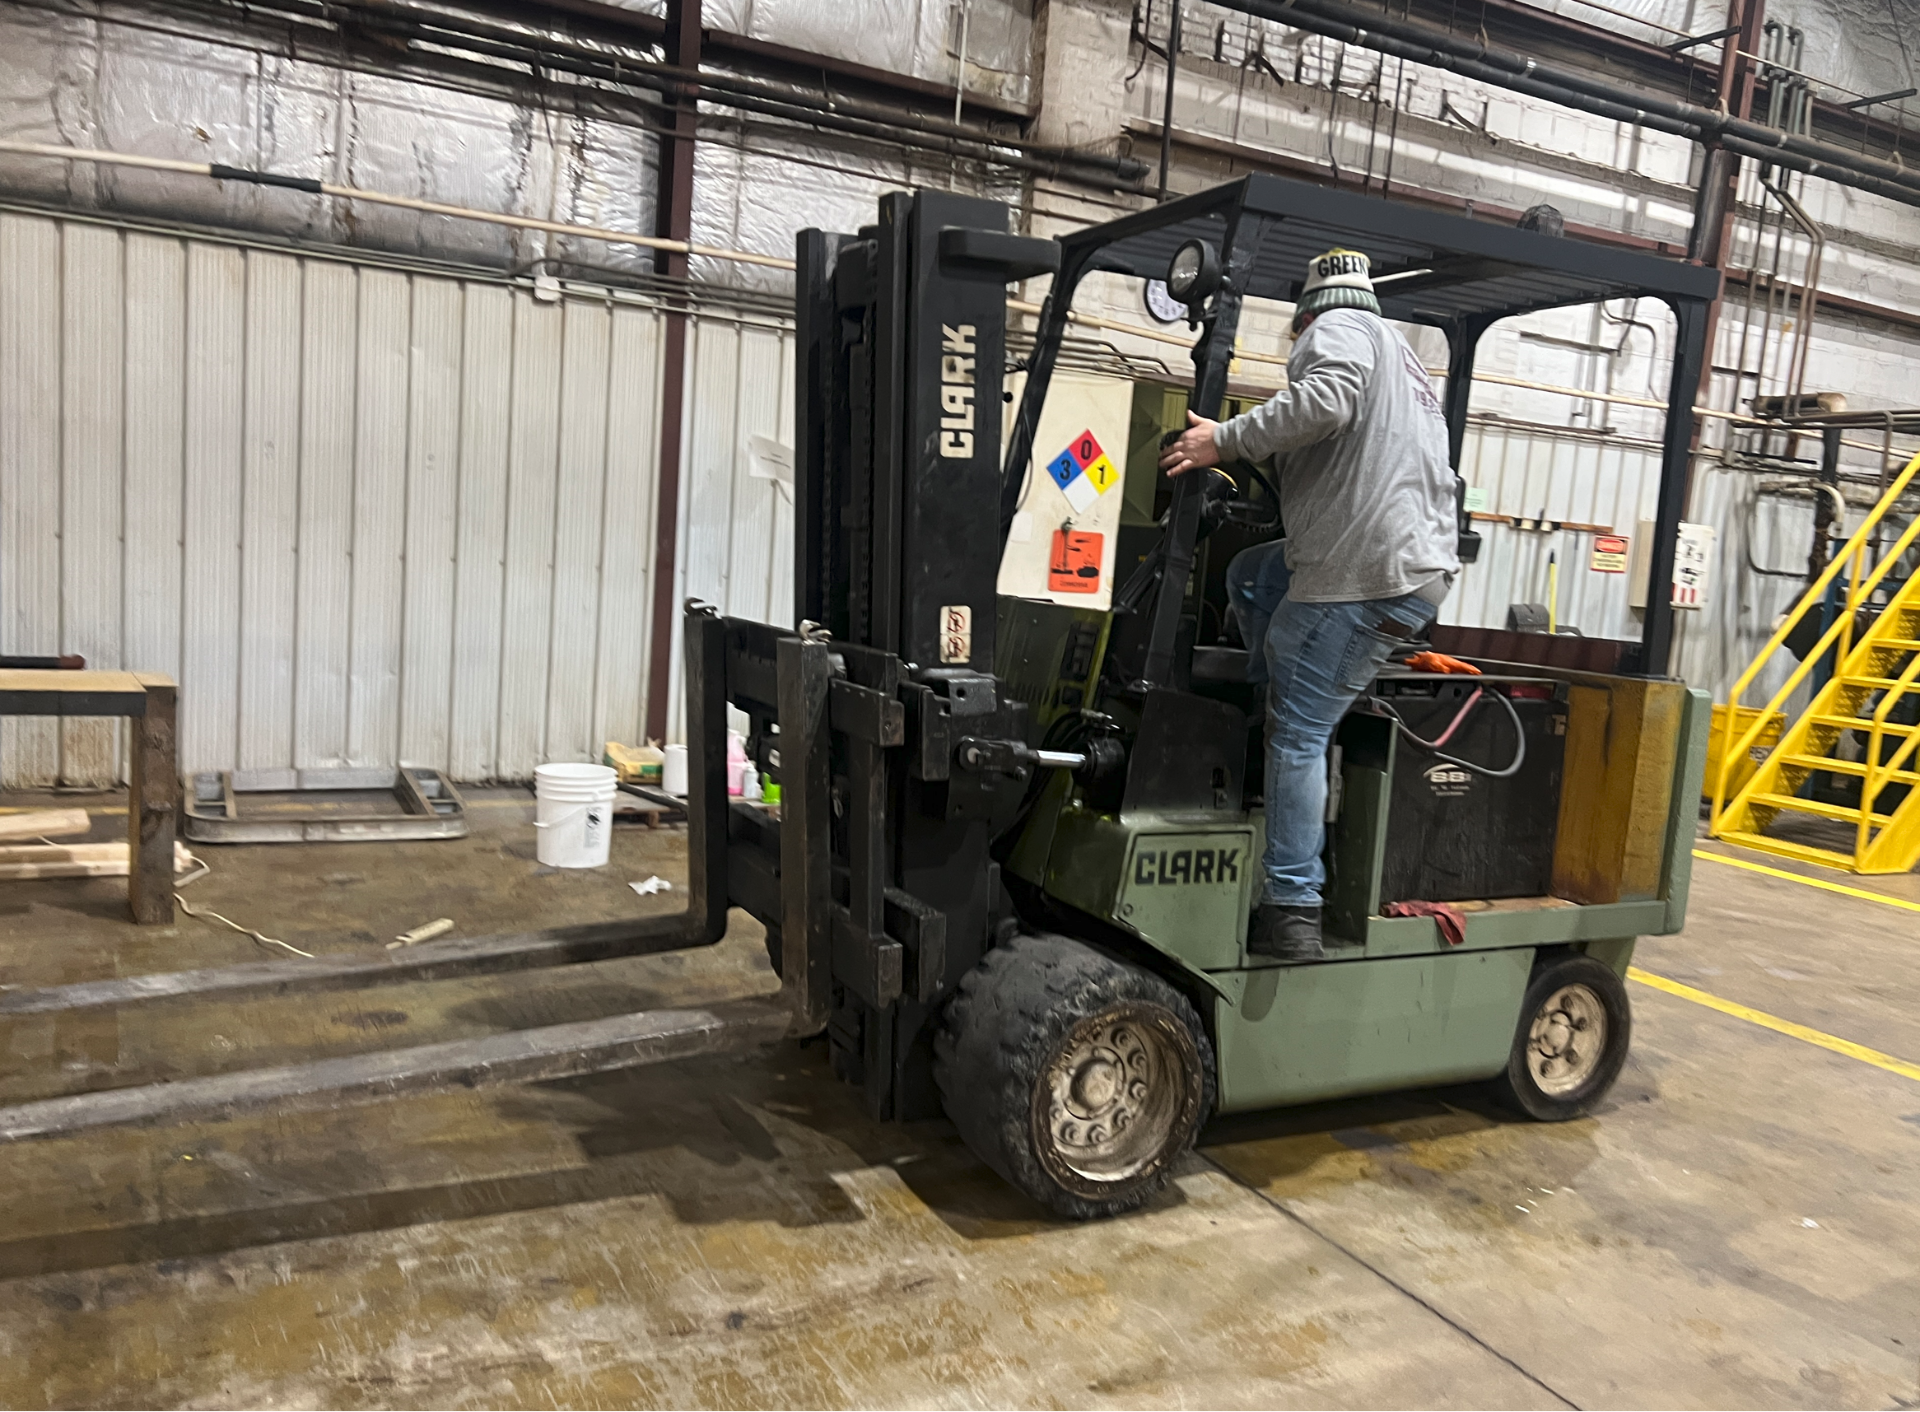 Clark 11,850 LB Capacity Sit-Down Electric Forklift, Model: EC500-120, S/N: E9120-0085-6890FB with - Image 7 of 16